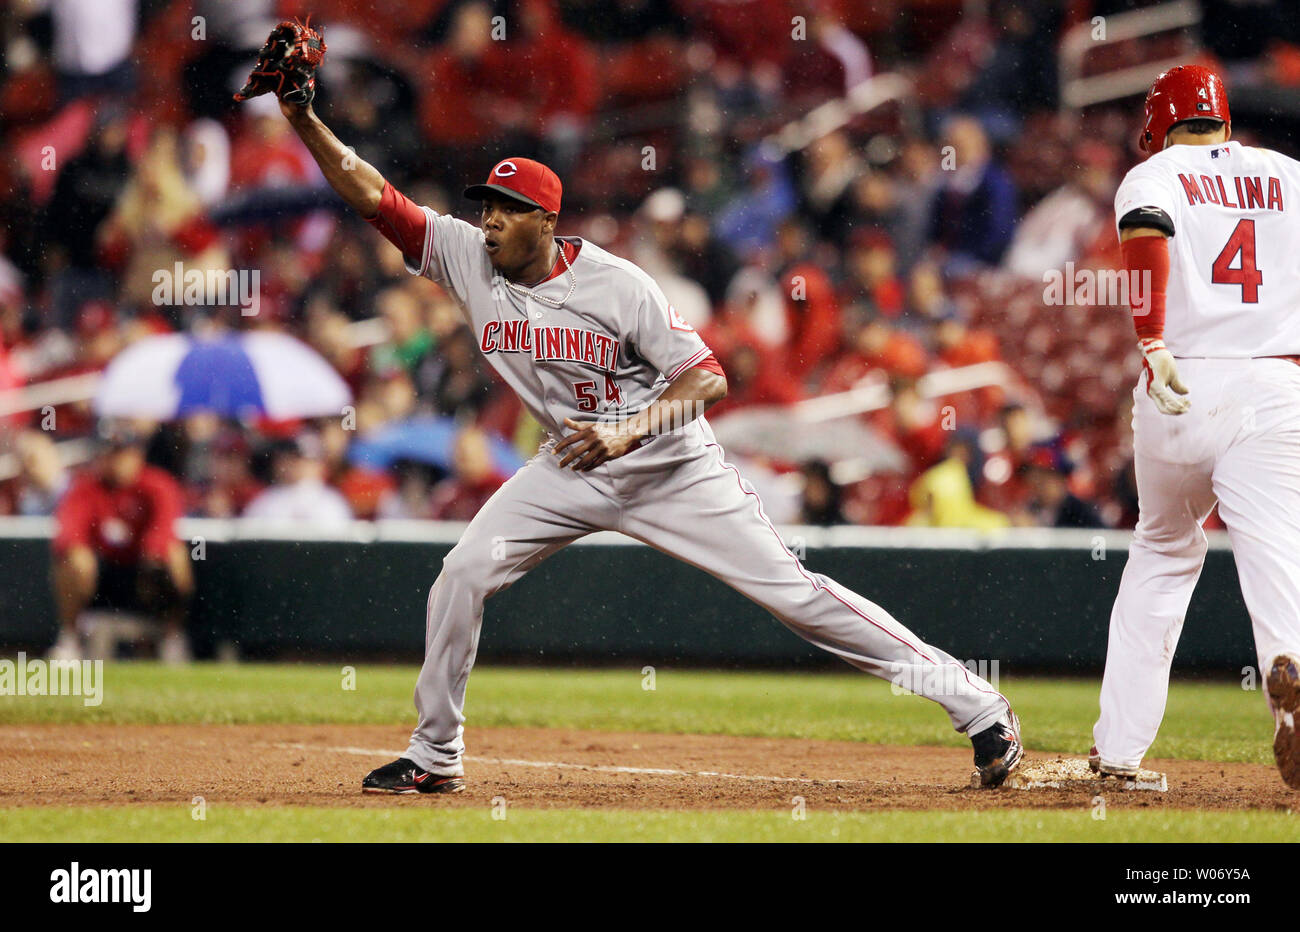 Cincinnati Reds pitcher Aroldis Chapman works against the American League  during the All-Star Game at Target Field in Minneapolis on Tuesday, July  15, 2014. The A.L. won, 5-3. (Photo by Kyndell Harkness/Minneapolis